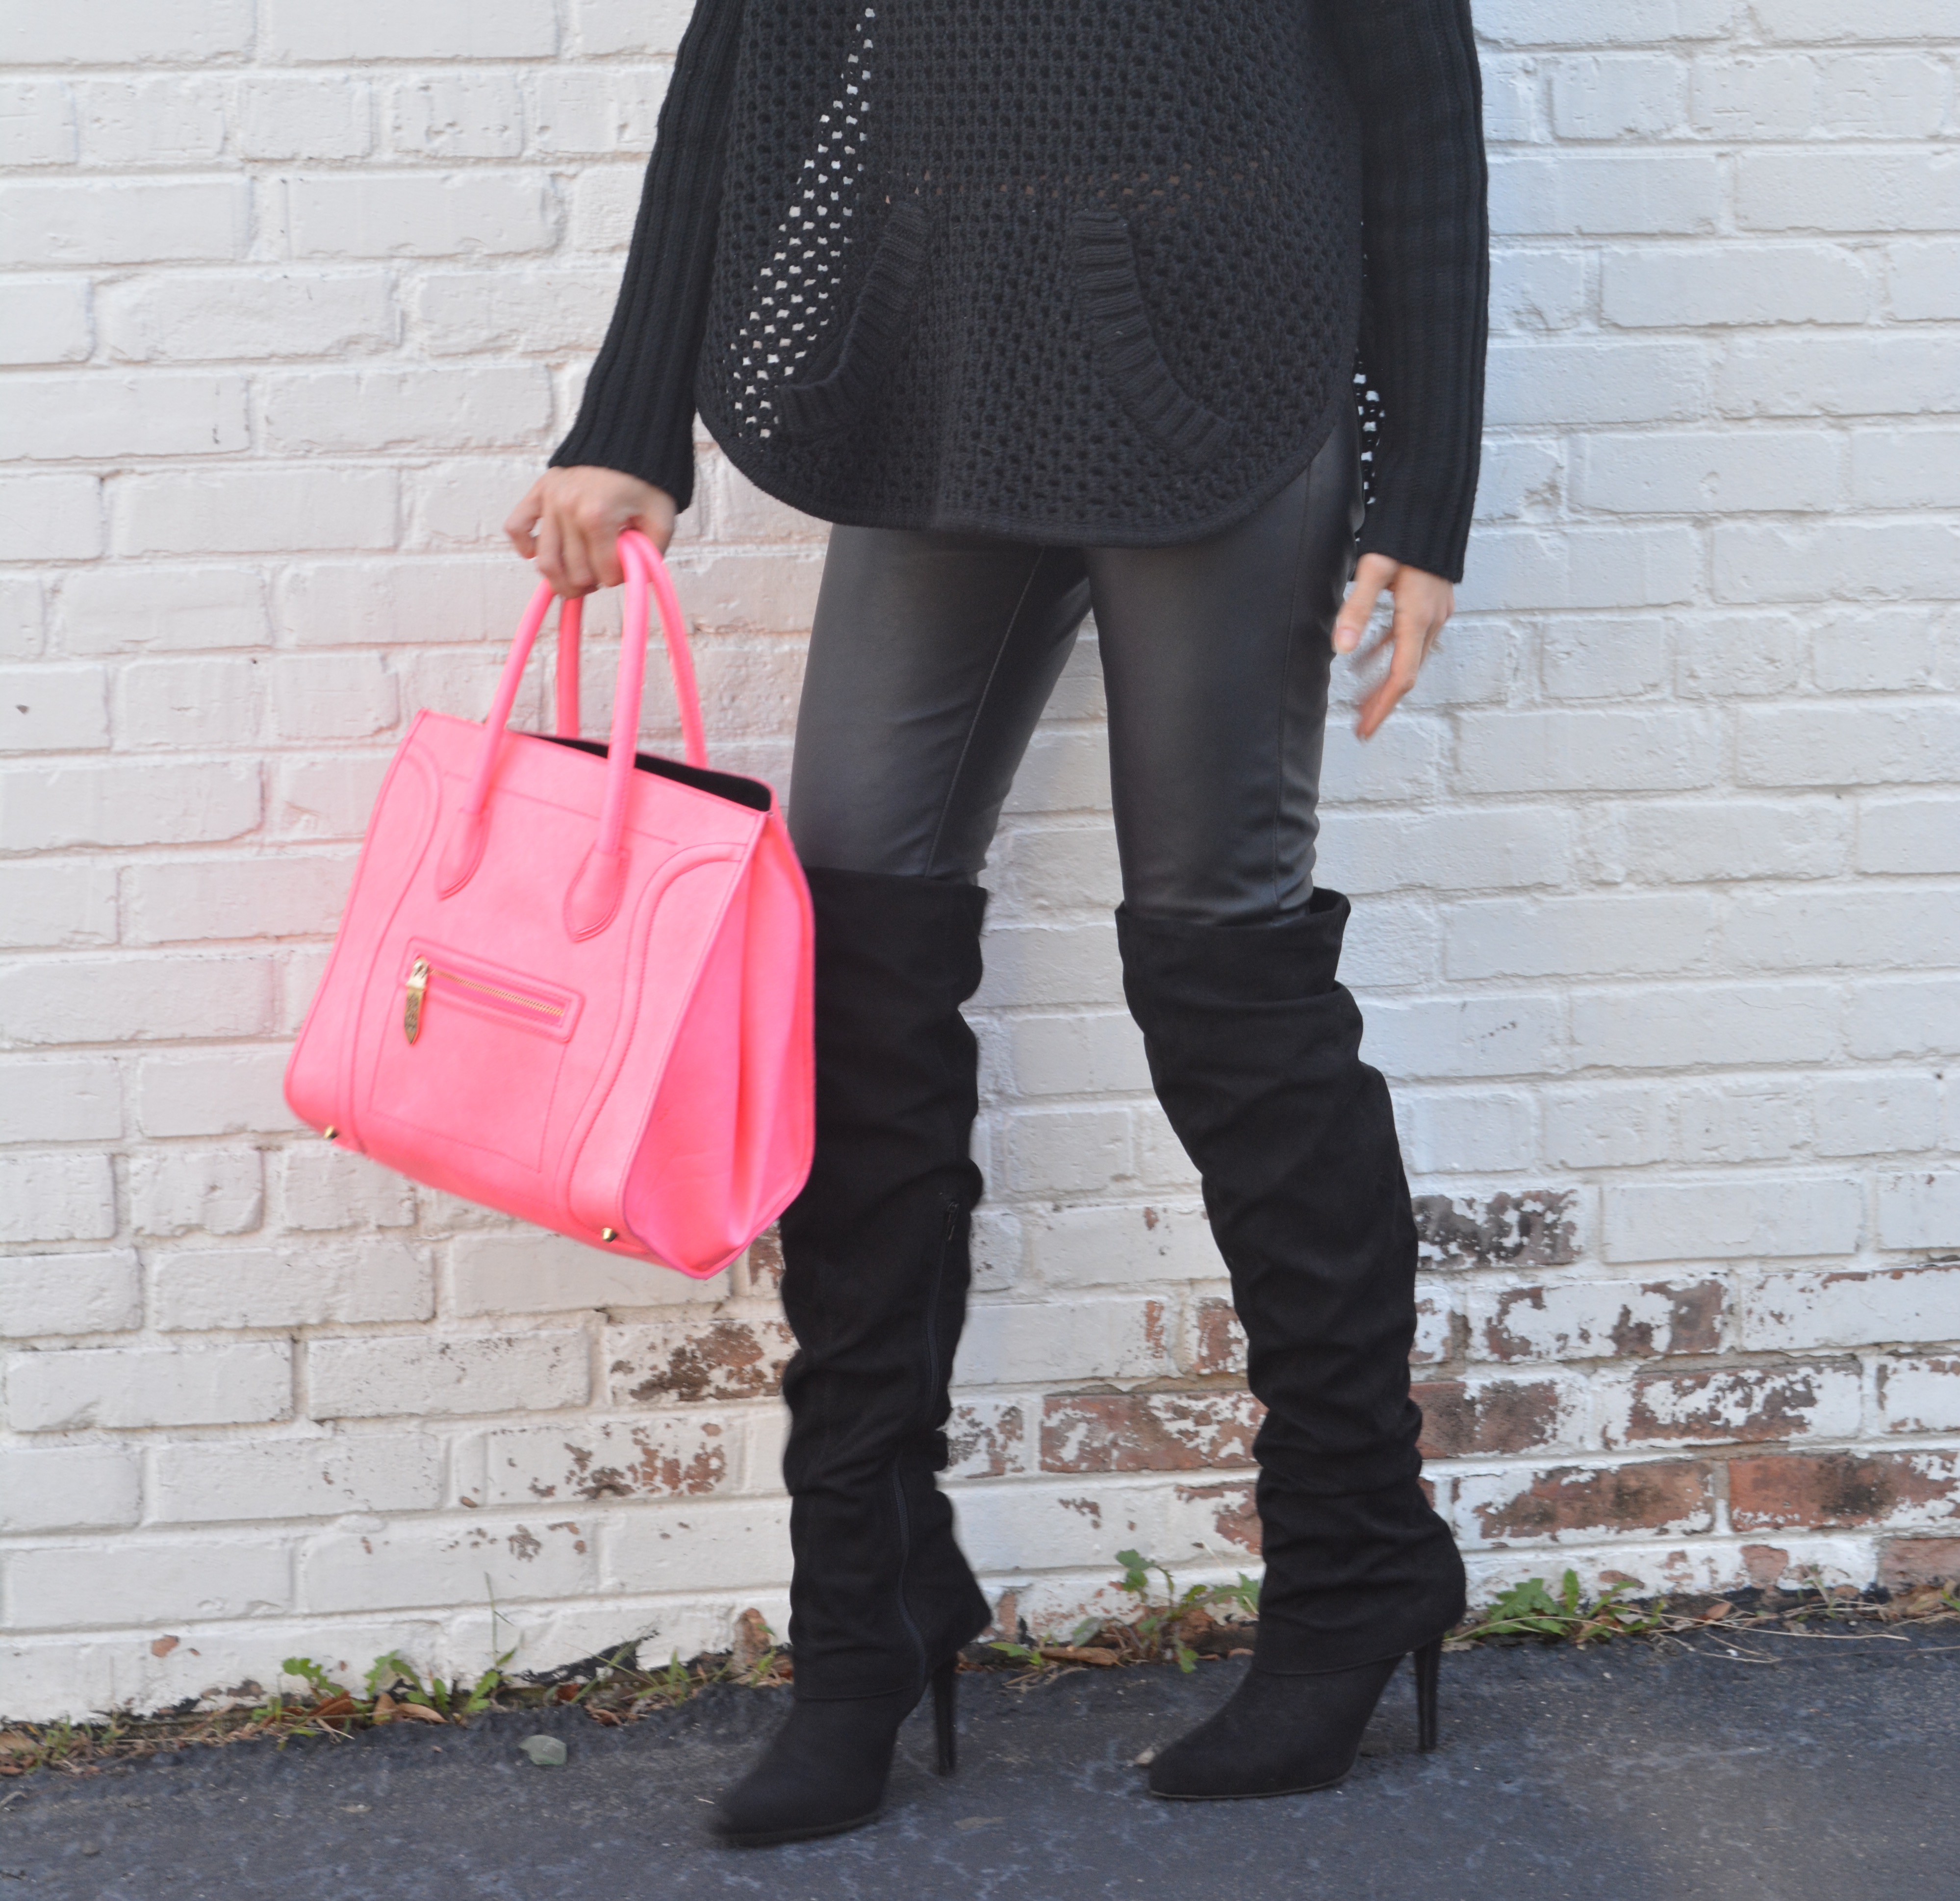 Fashion blogger leather pants and sweater outfits